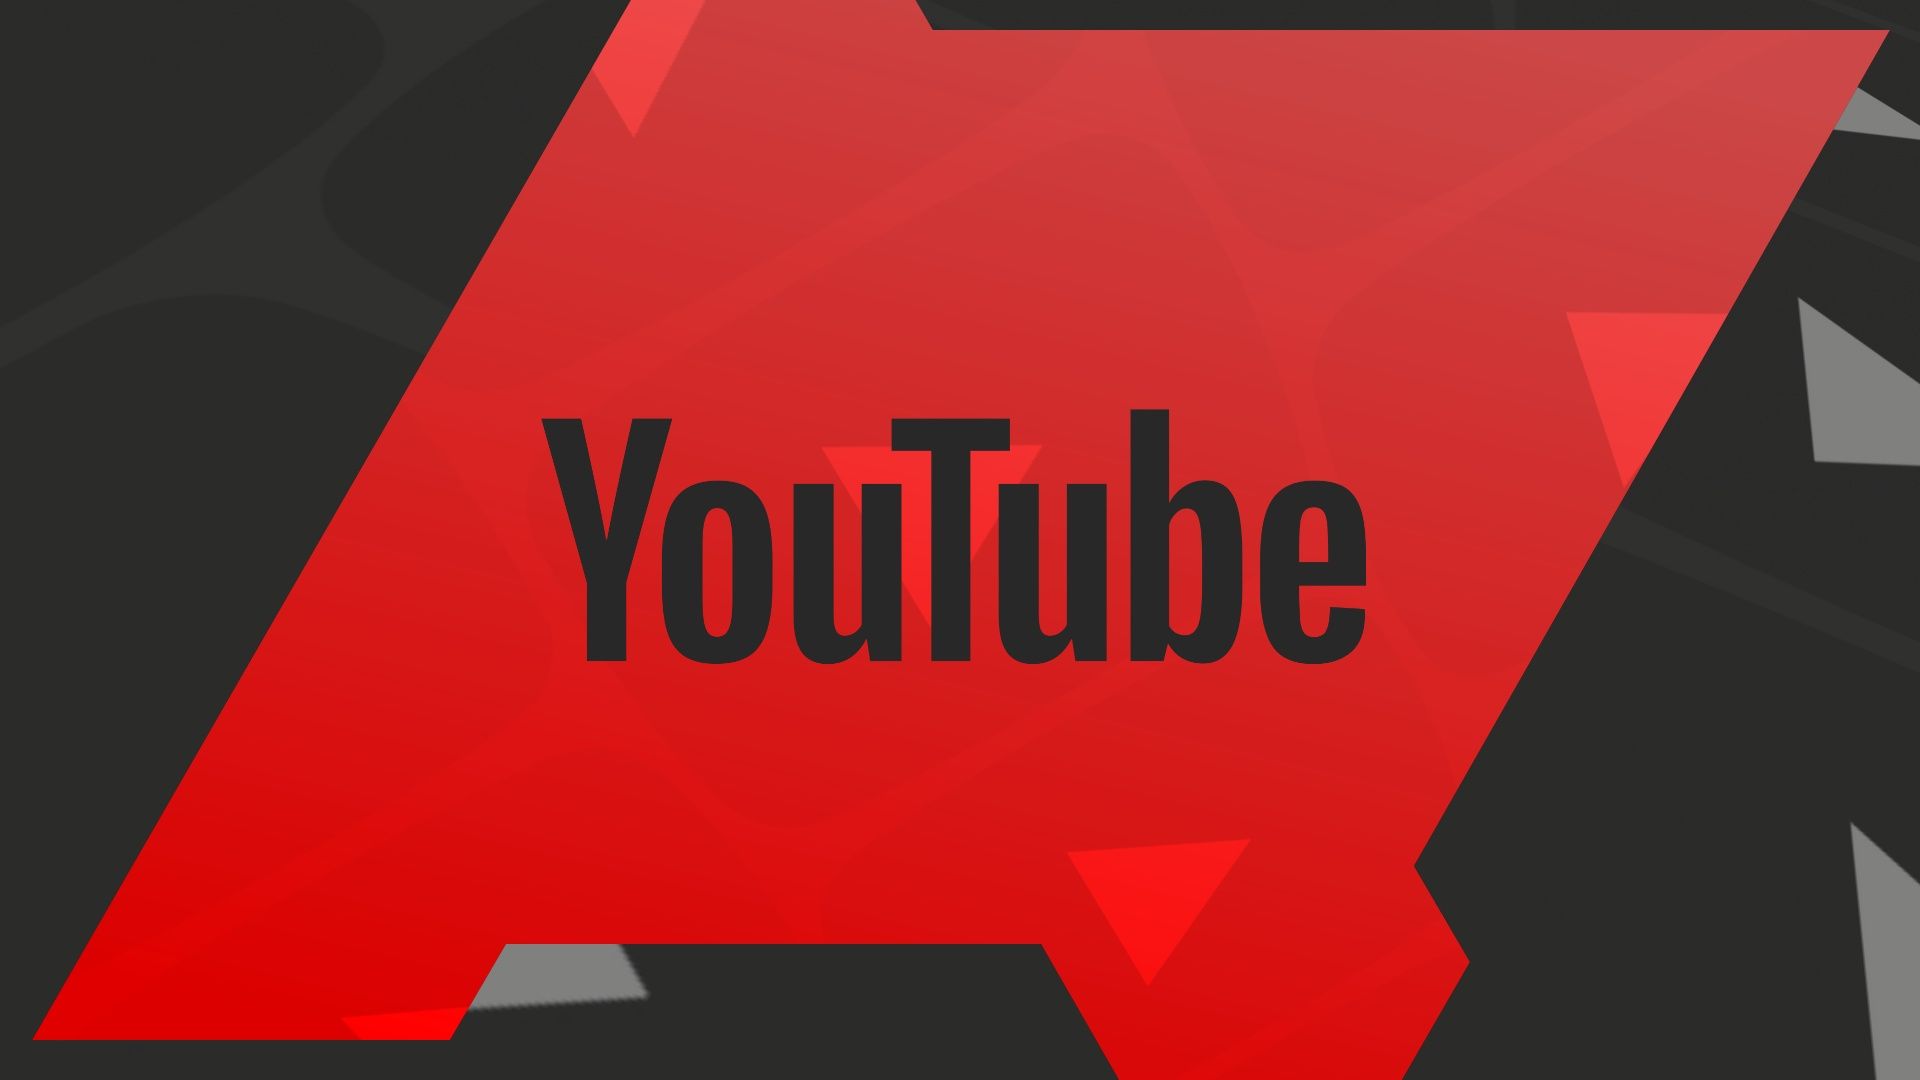 The YouTube logo inside a red Android Police logo